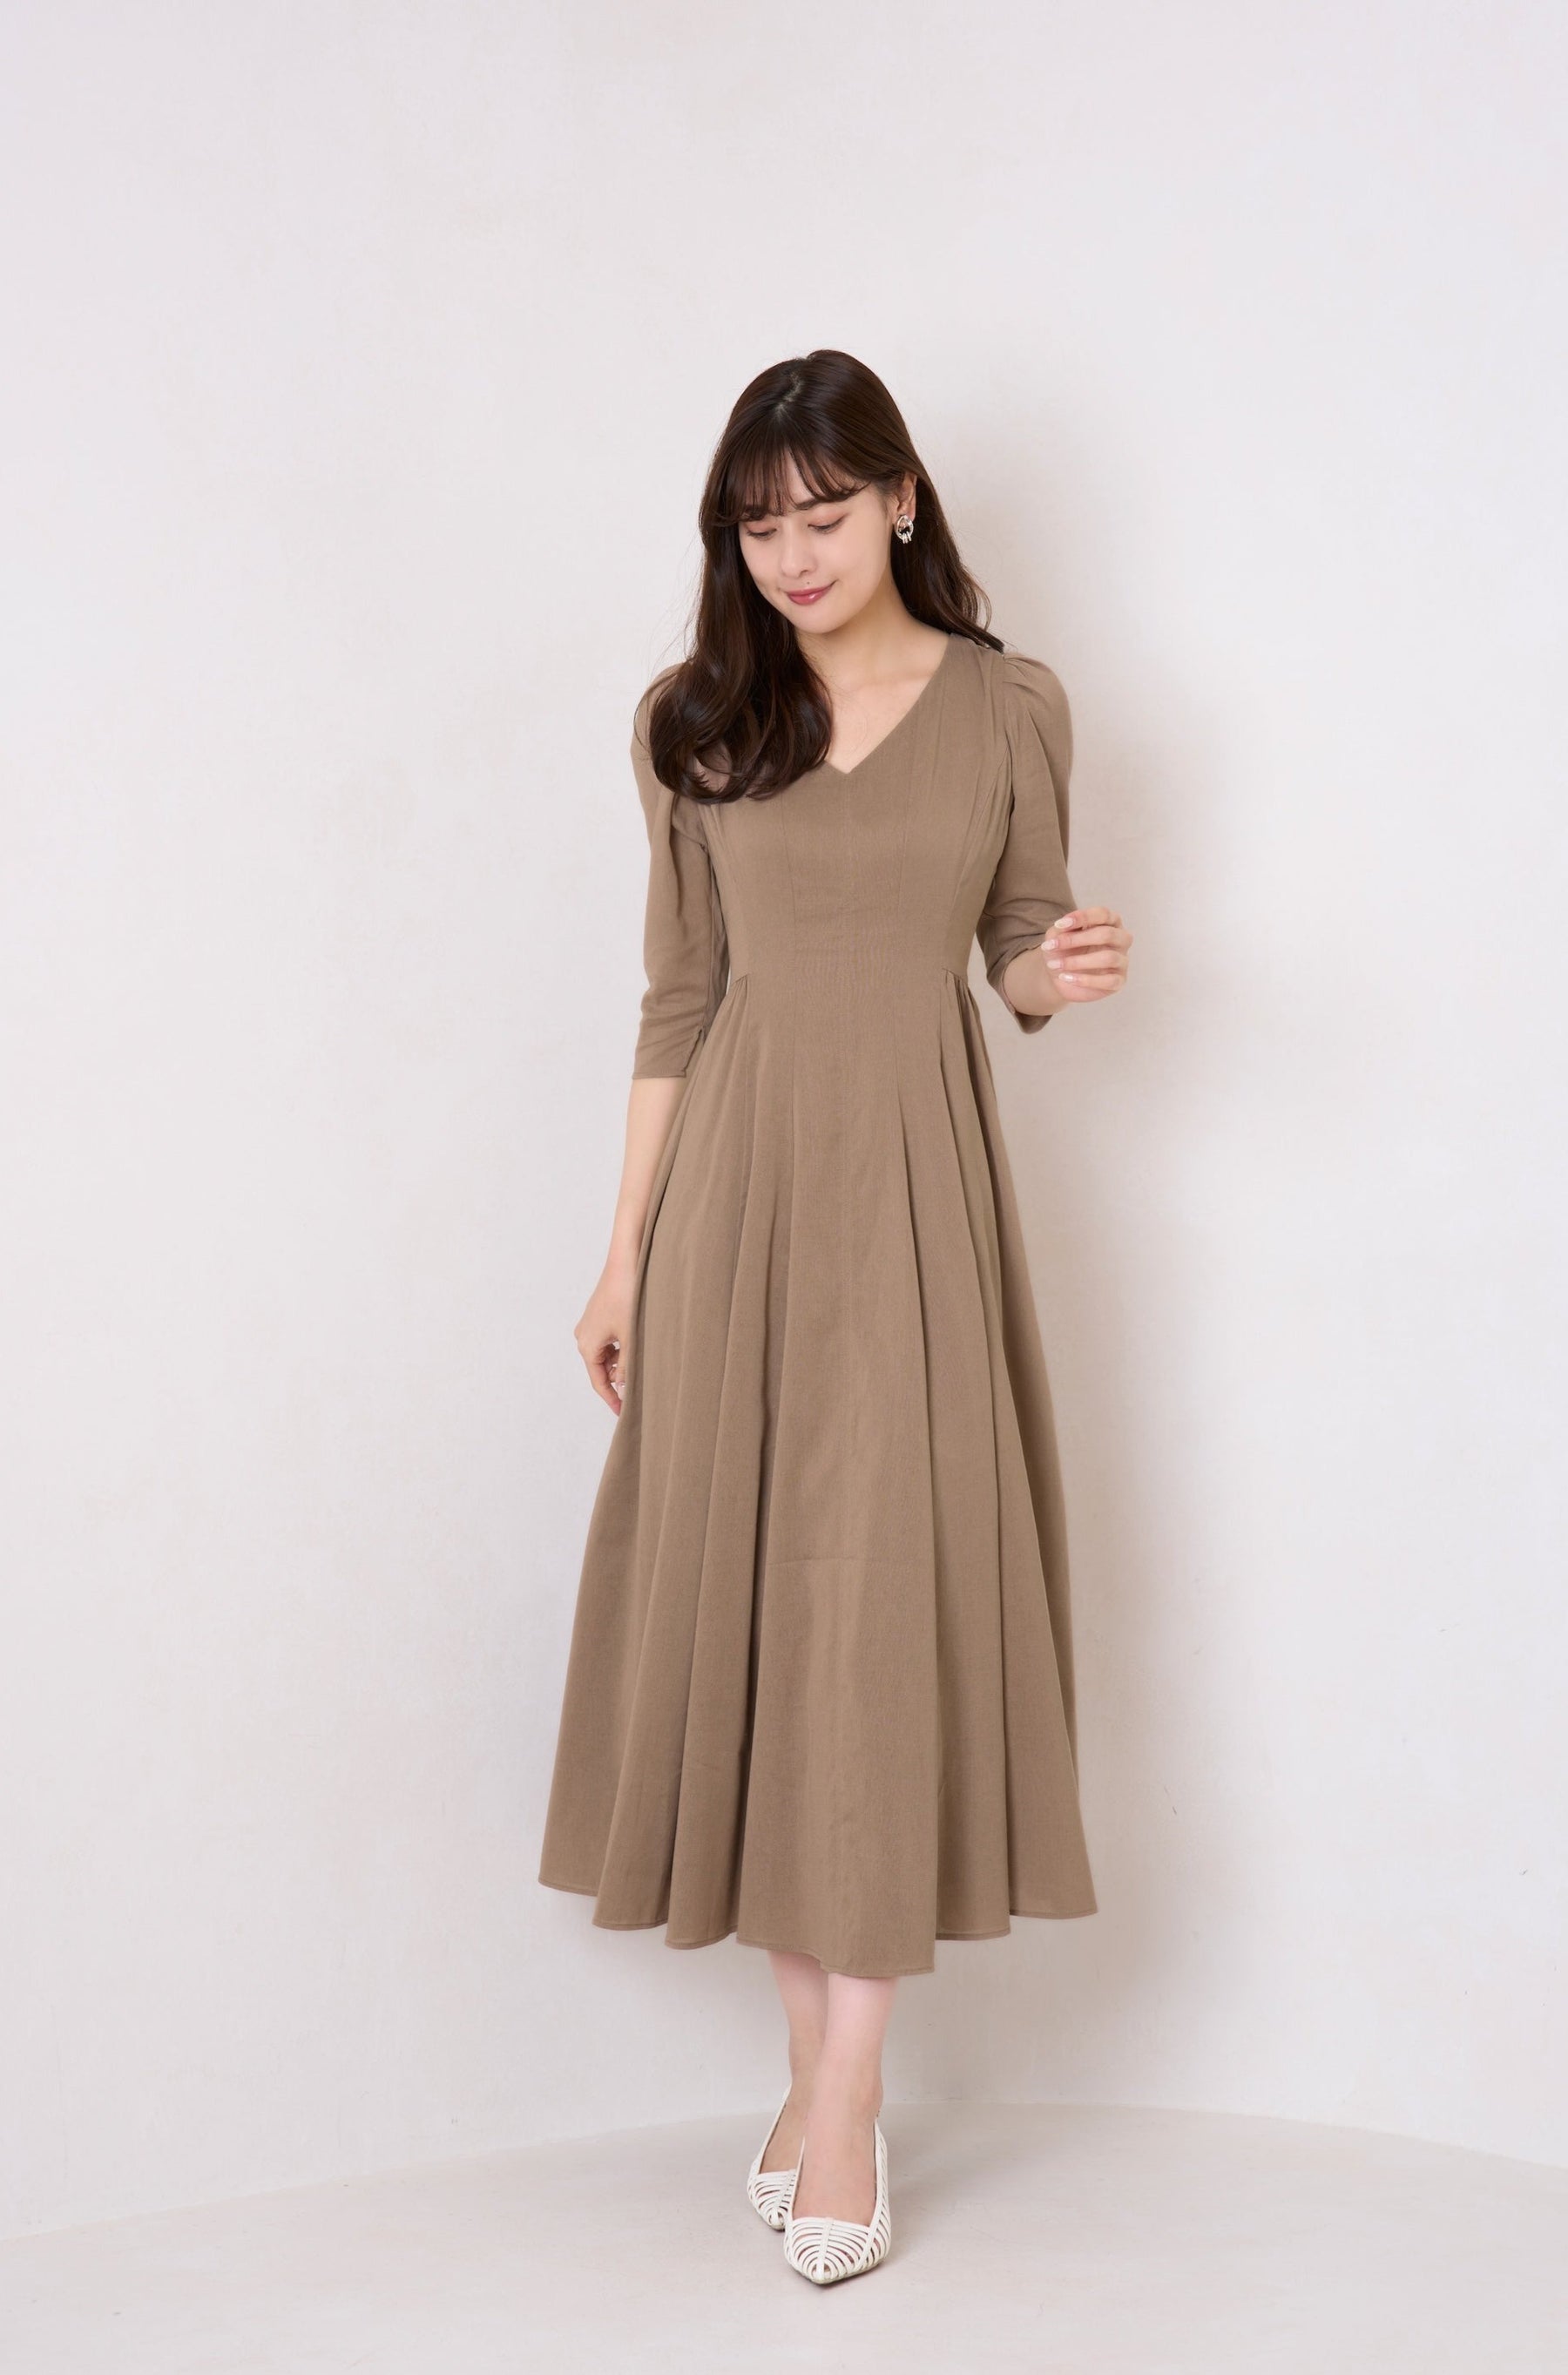 [Shipped in mid-March] Voile Back Ribbon Long Dress